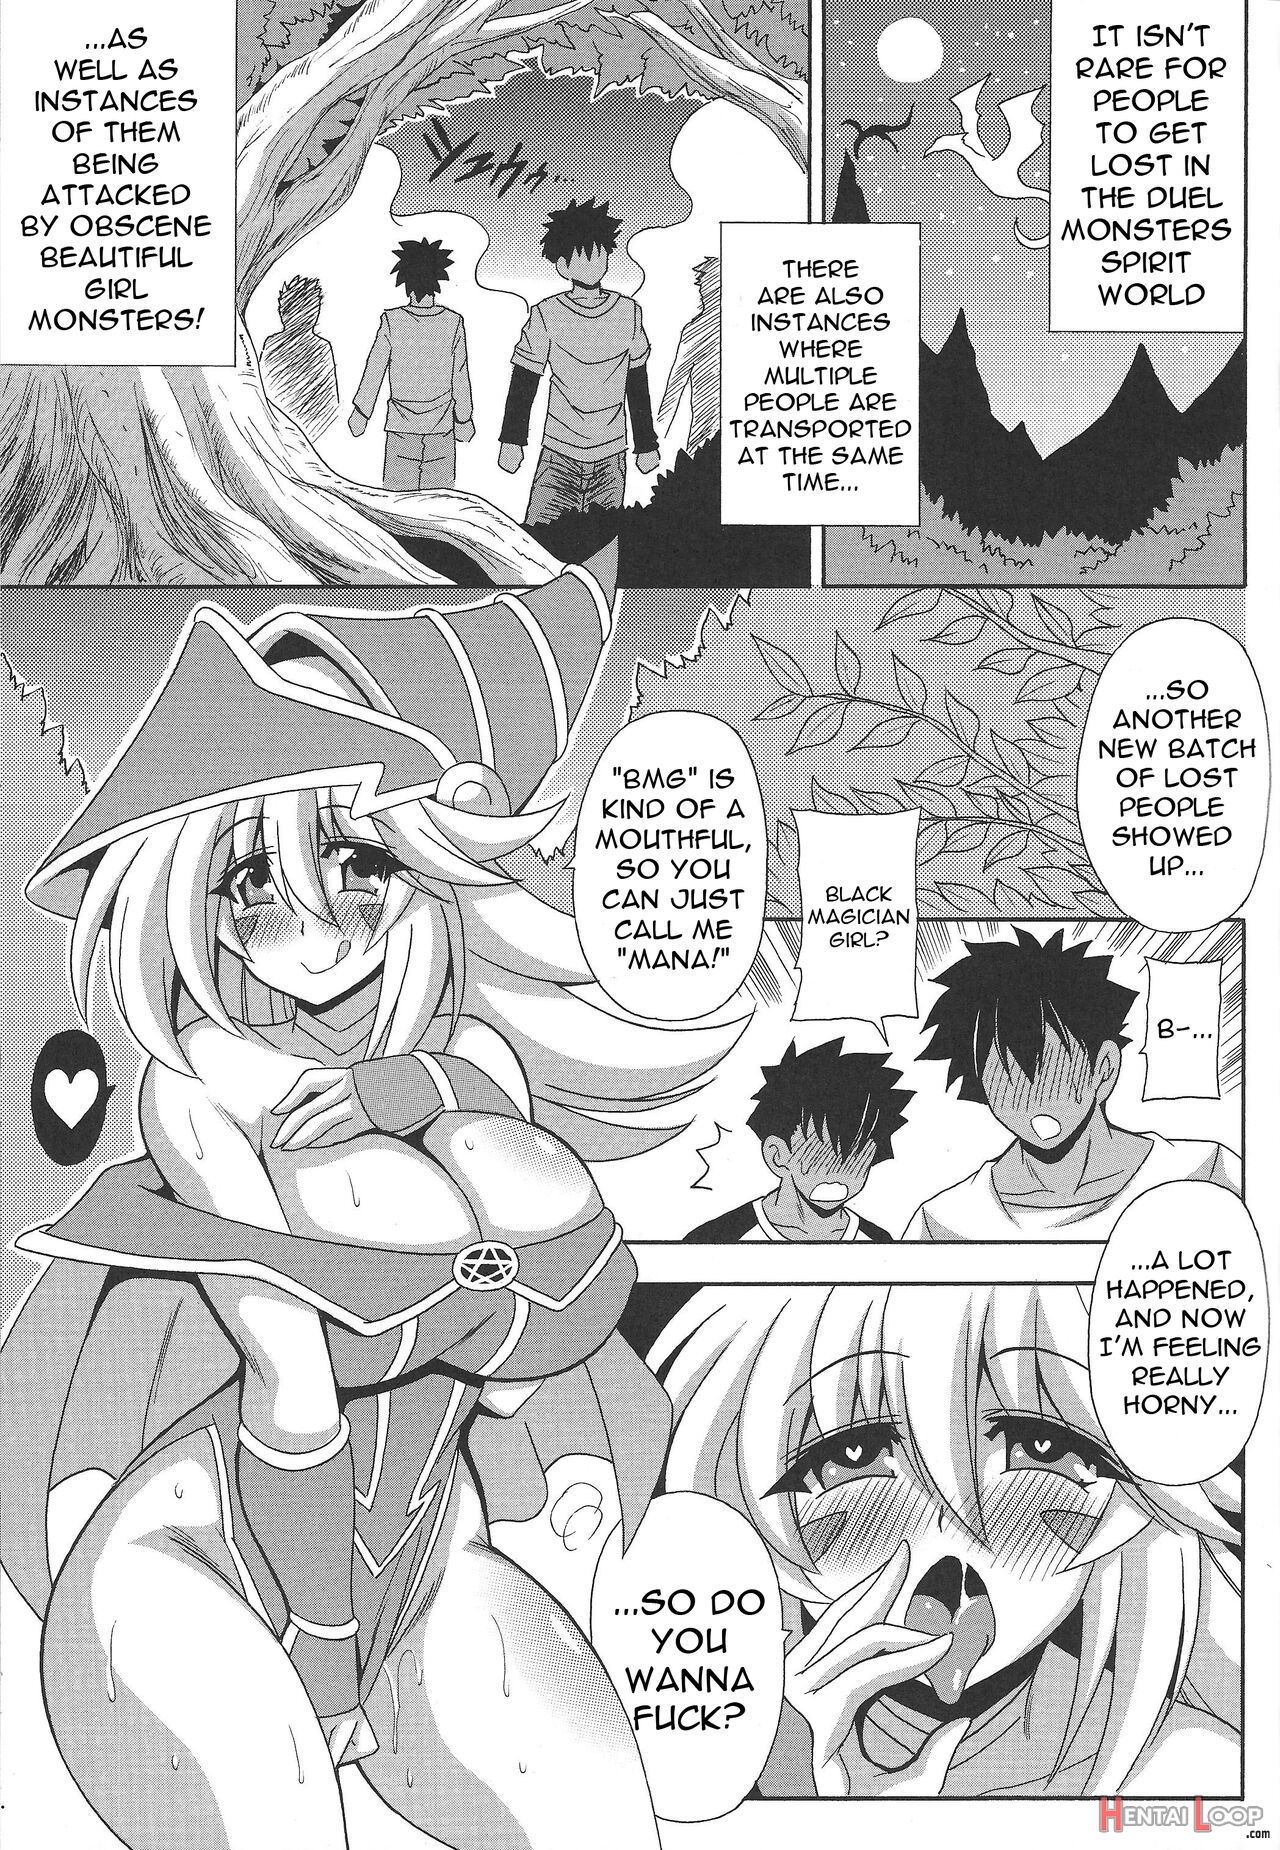 Page 7 of Having Sex With Dark Magician Girl (by Oujano Kaze) - Hentai  doujinshi for free at HentaiLoop